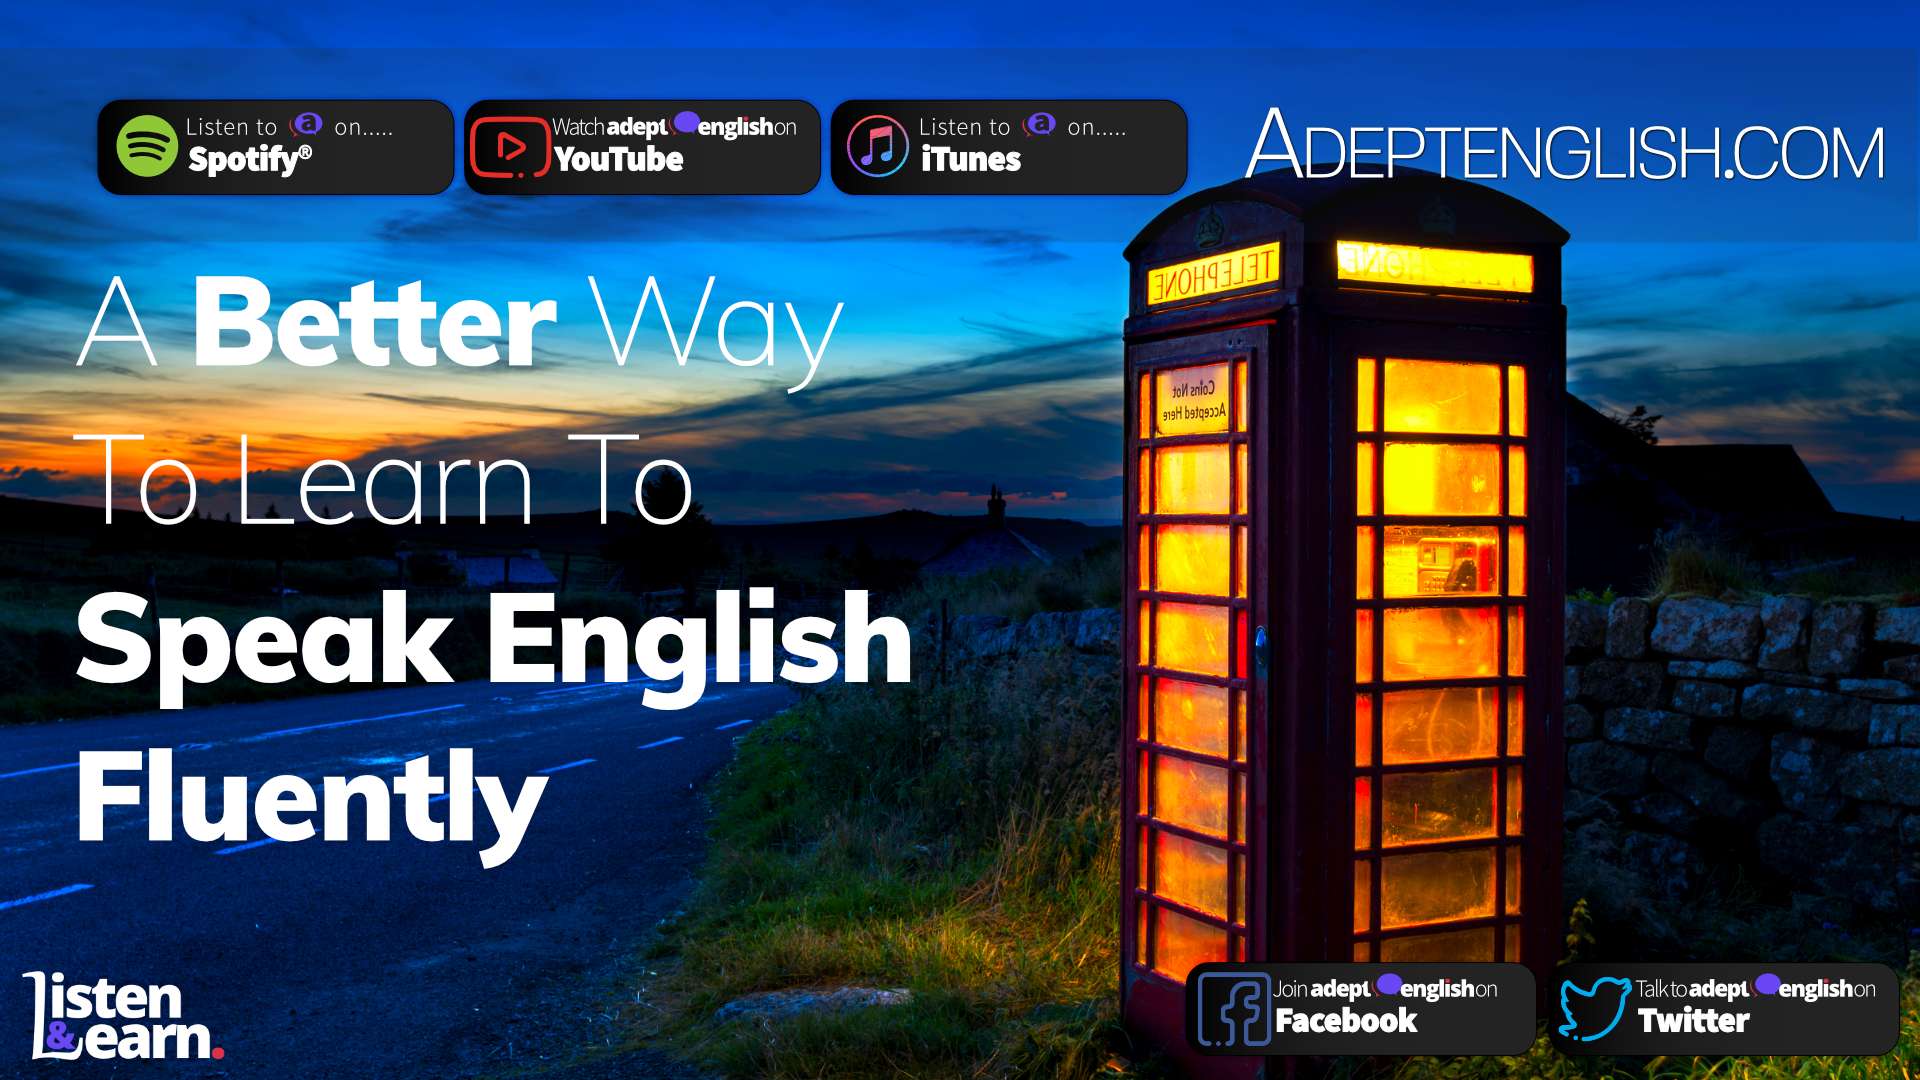 Find out about the Adept English listen & learn way of learning to speak English fluently.